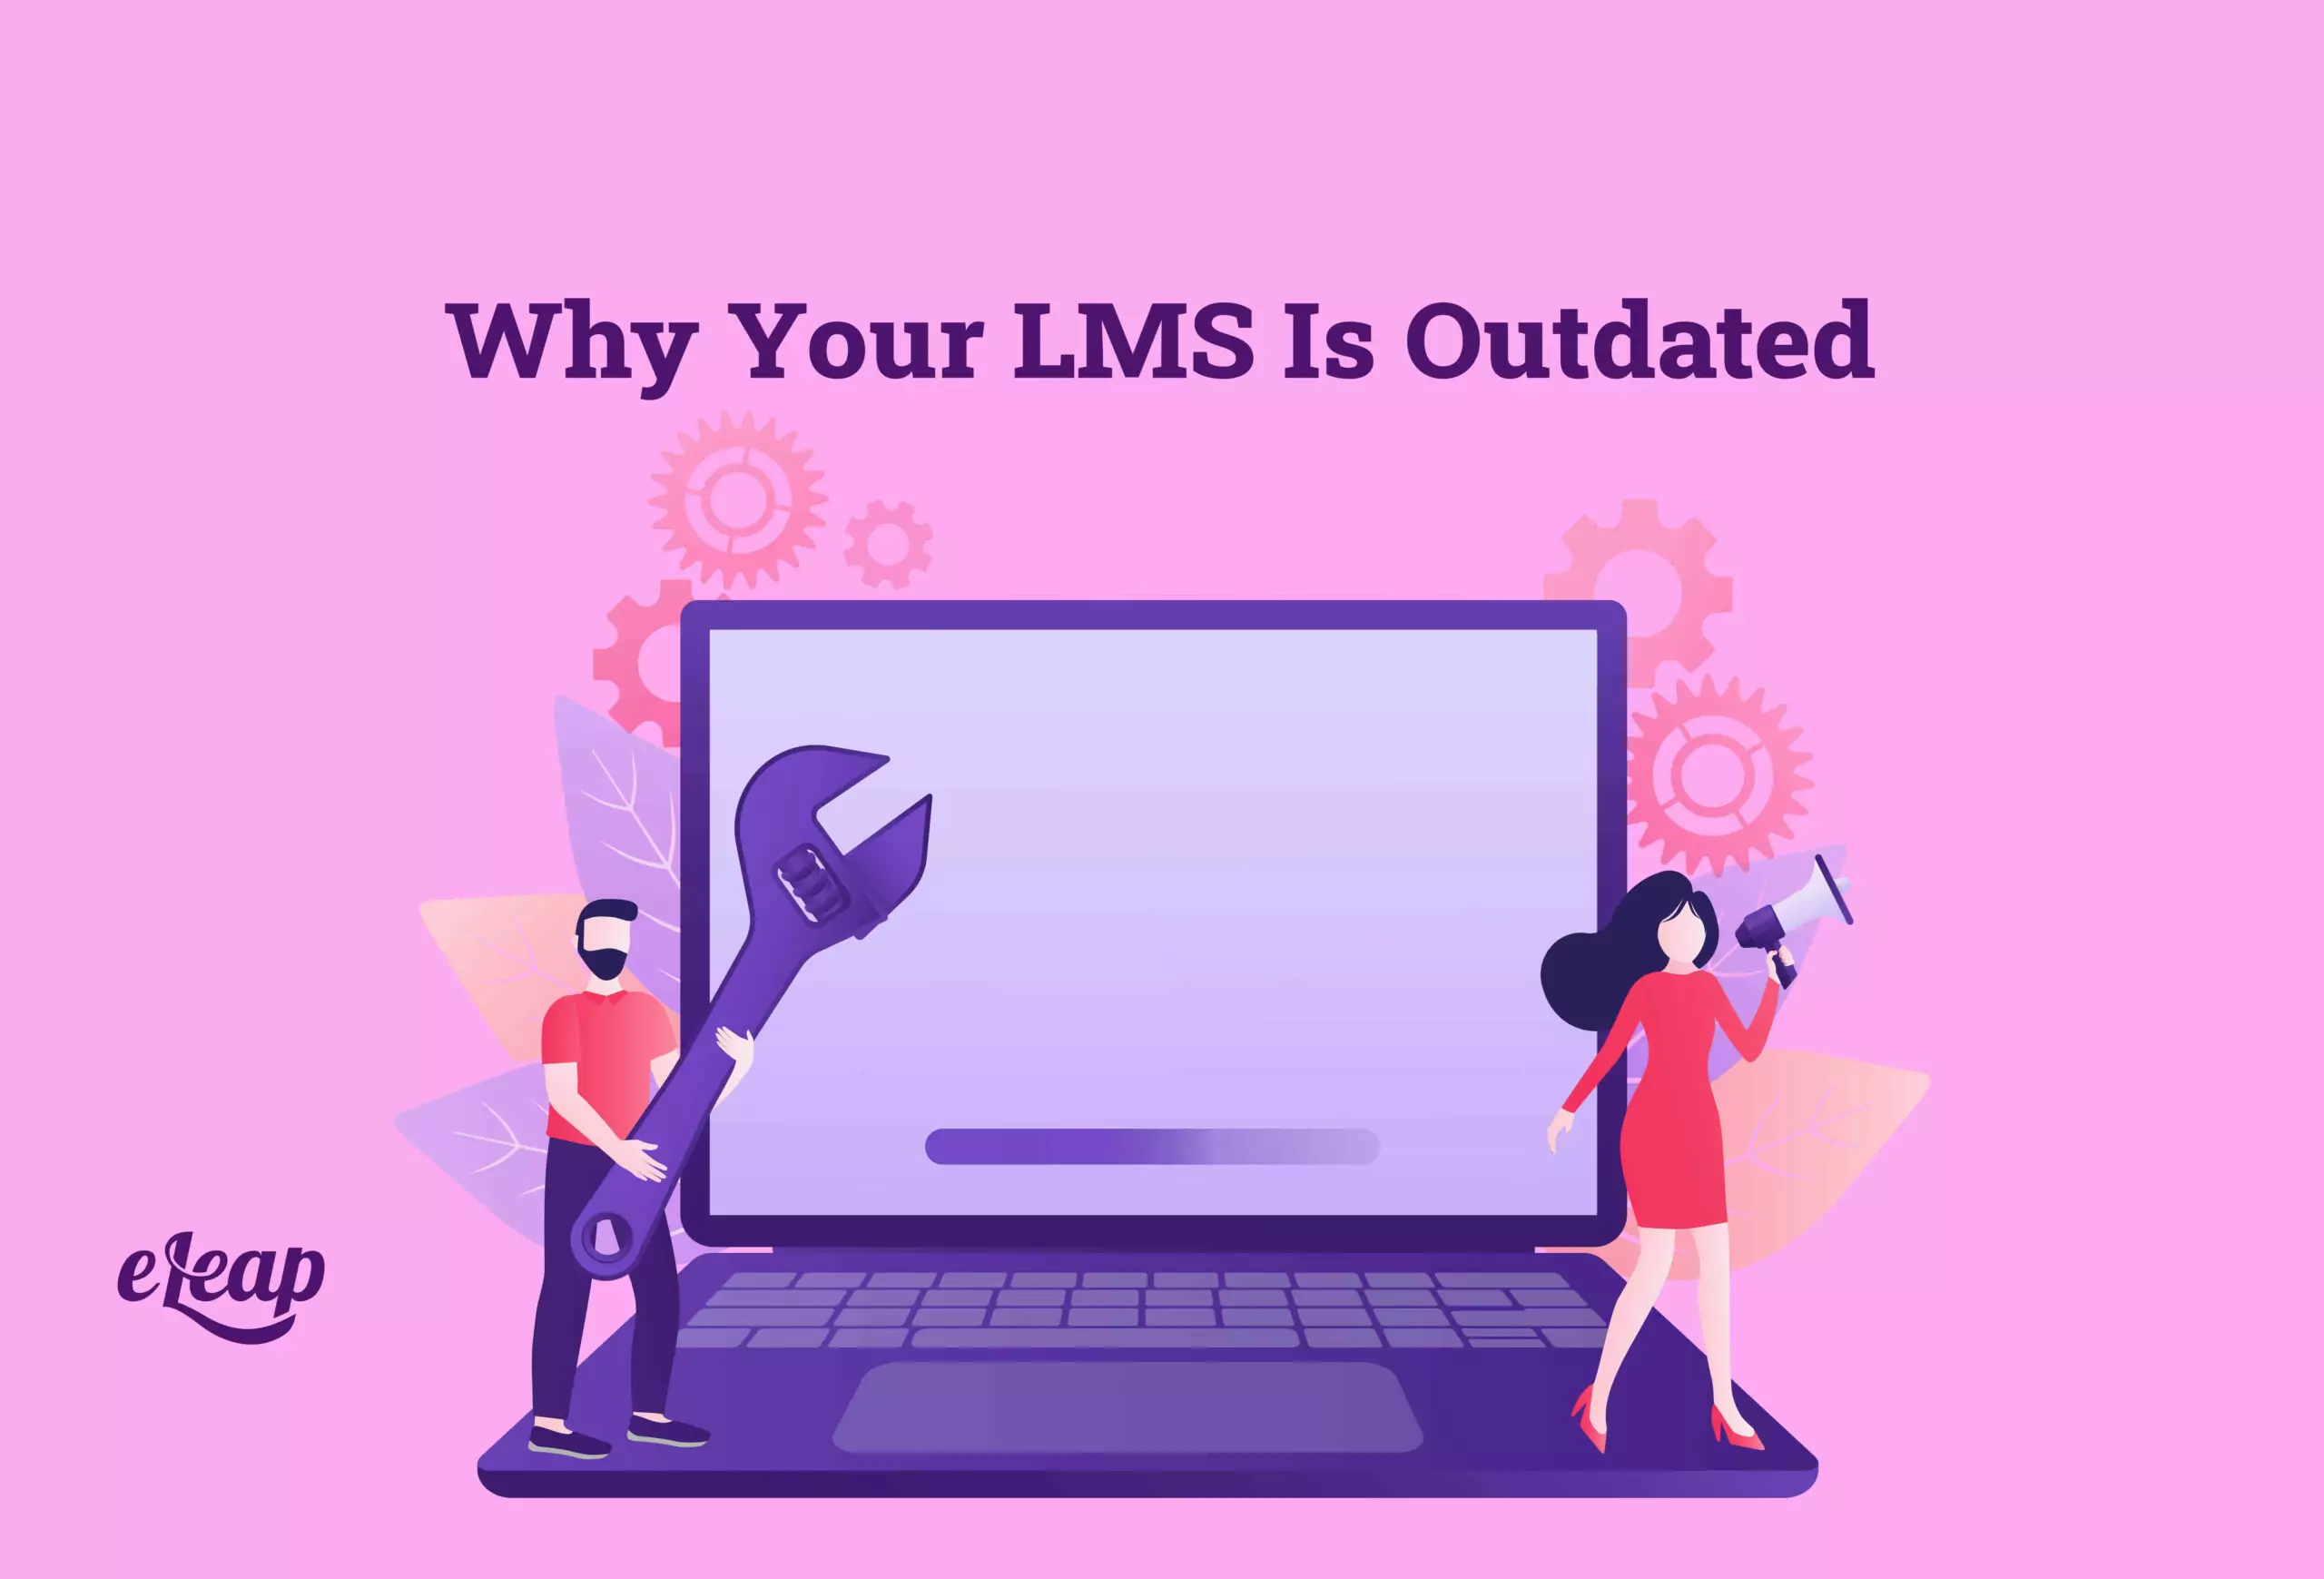 Why Your LMS Is Outdated